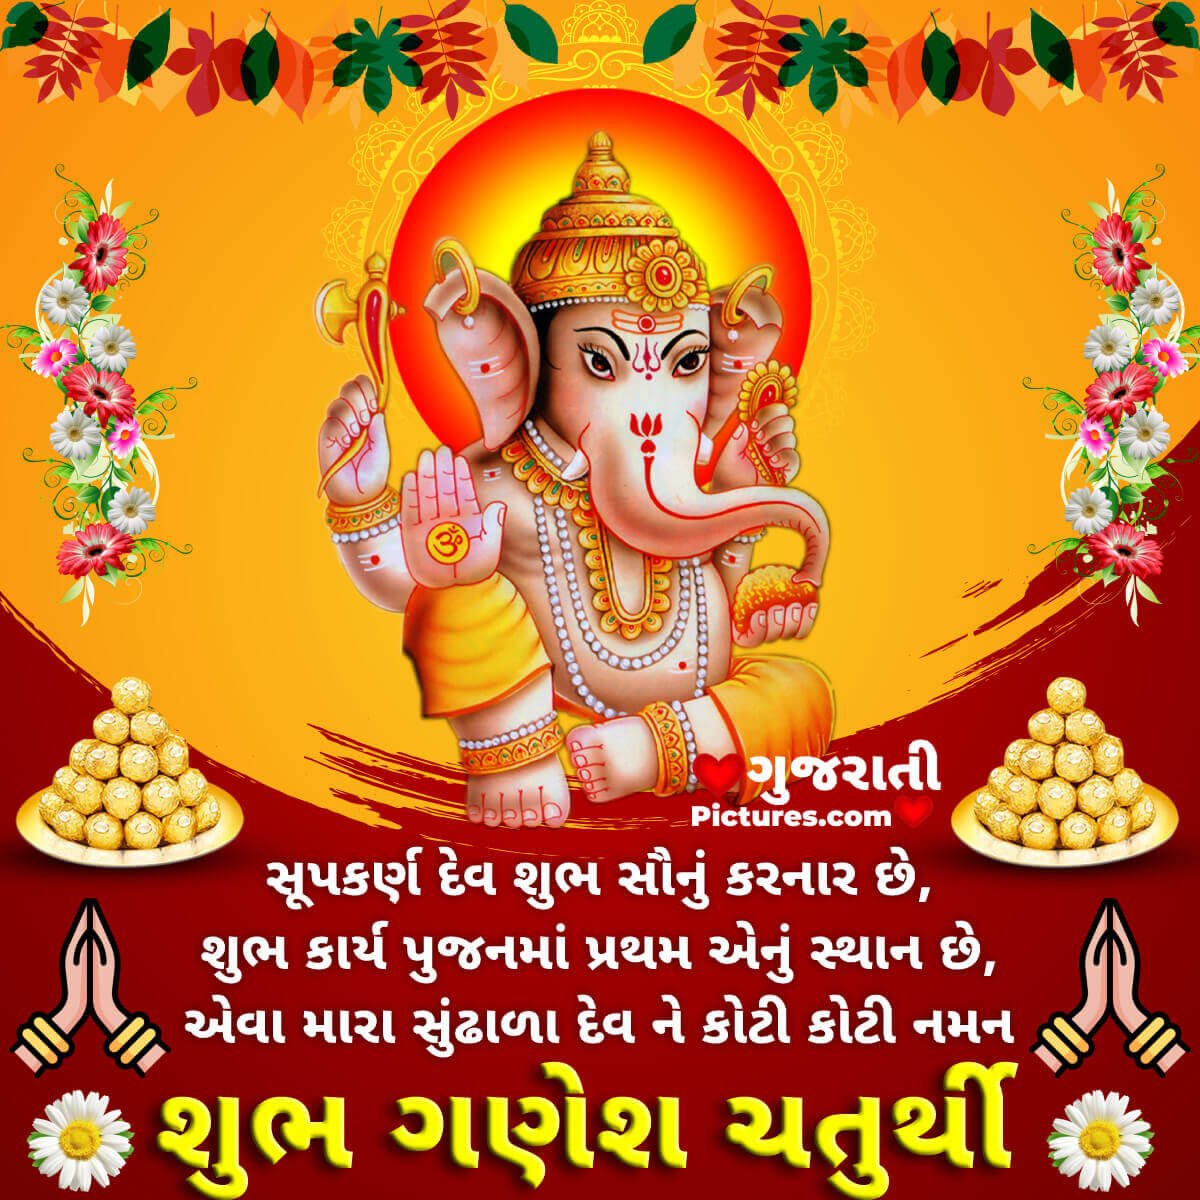 Blessed Ganesh Chaturthi To All